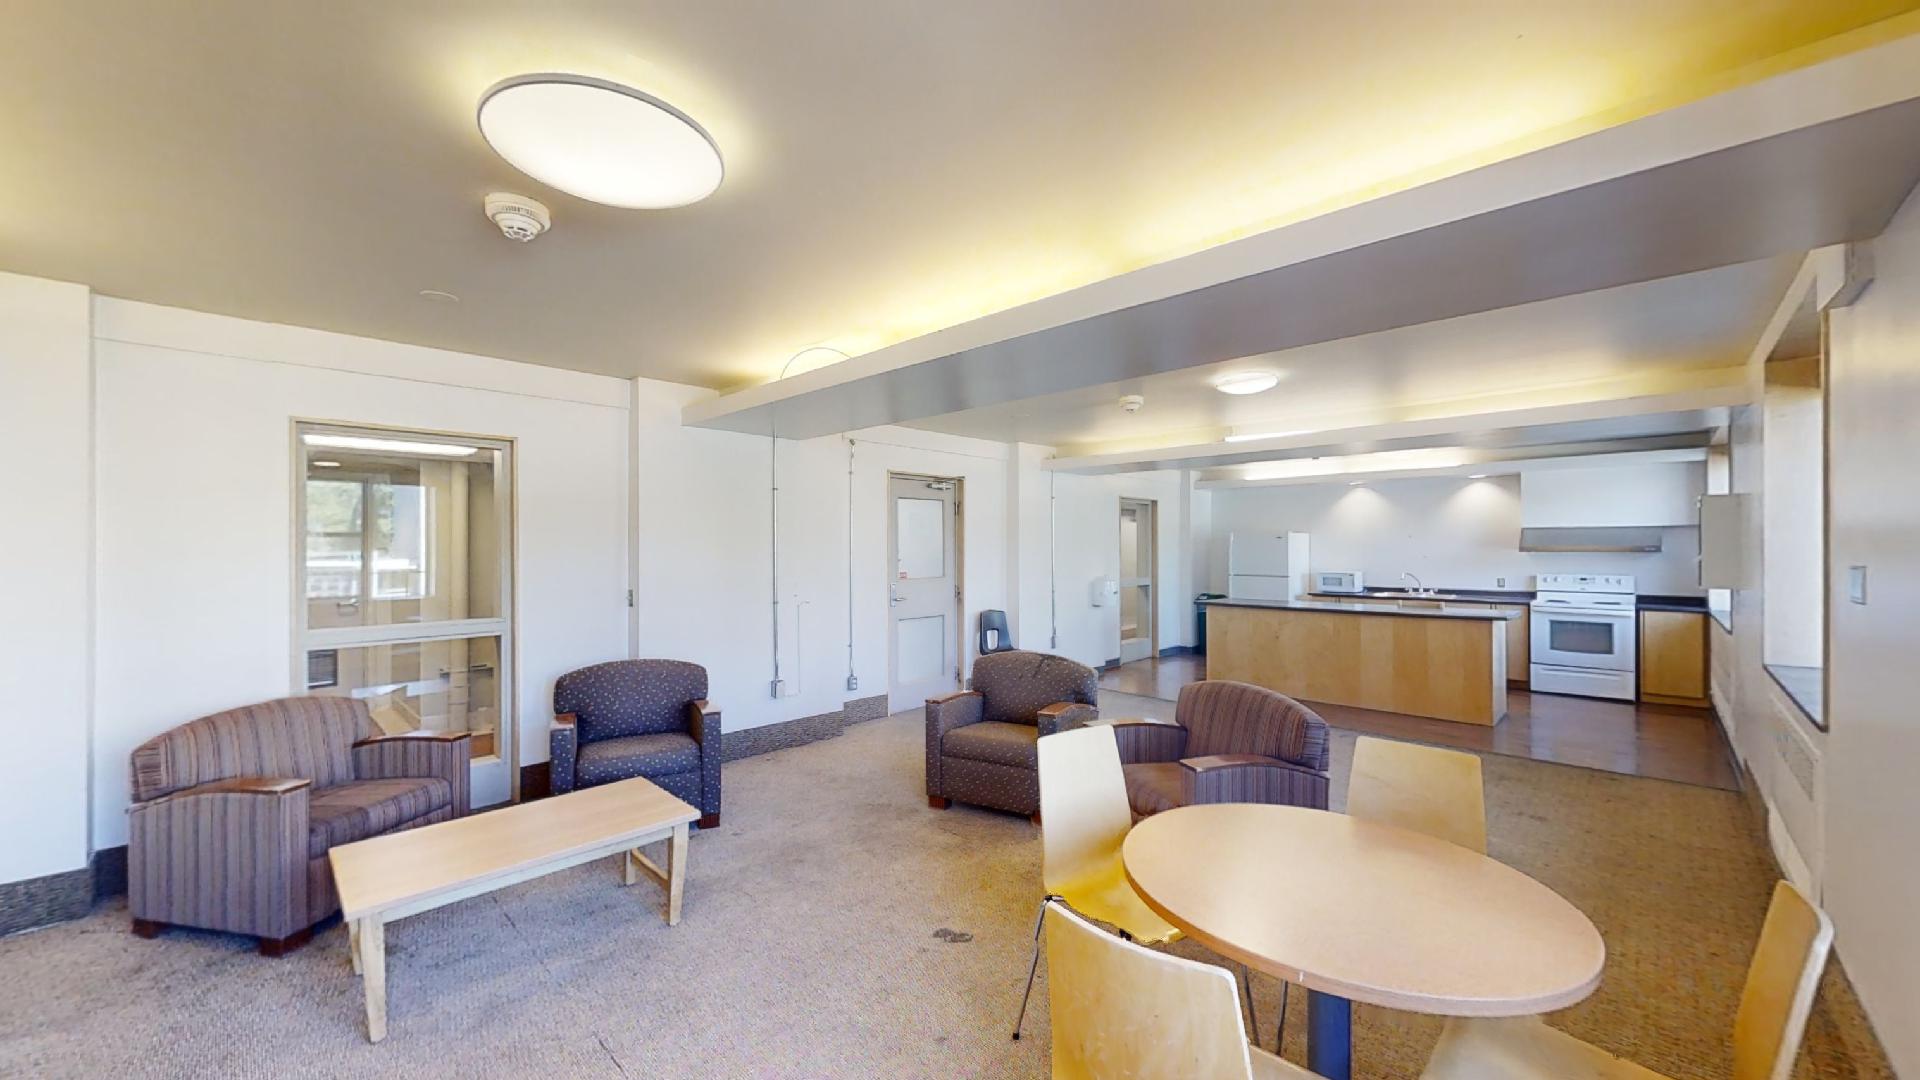 McNeill House Common Room